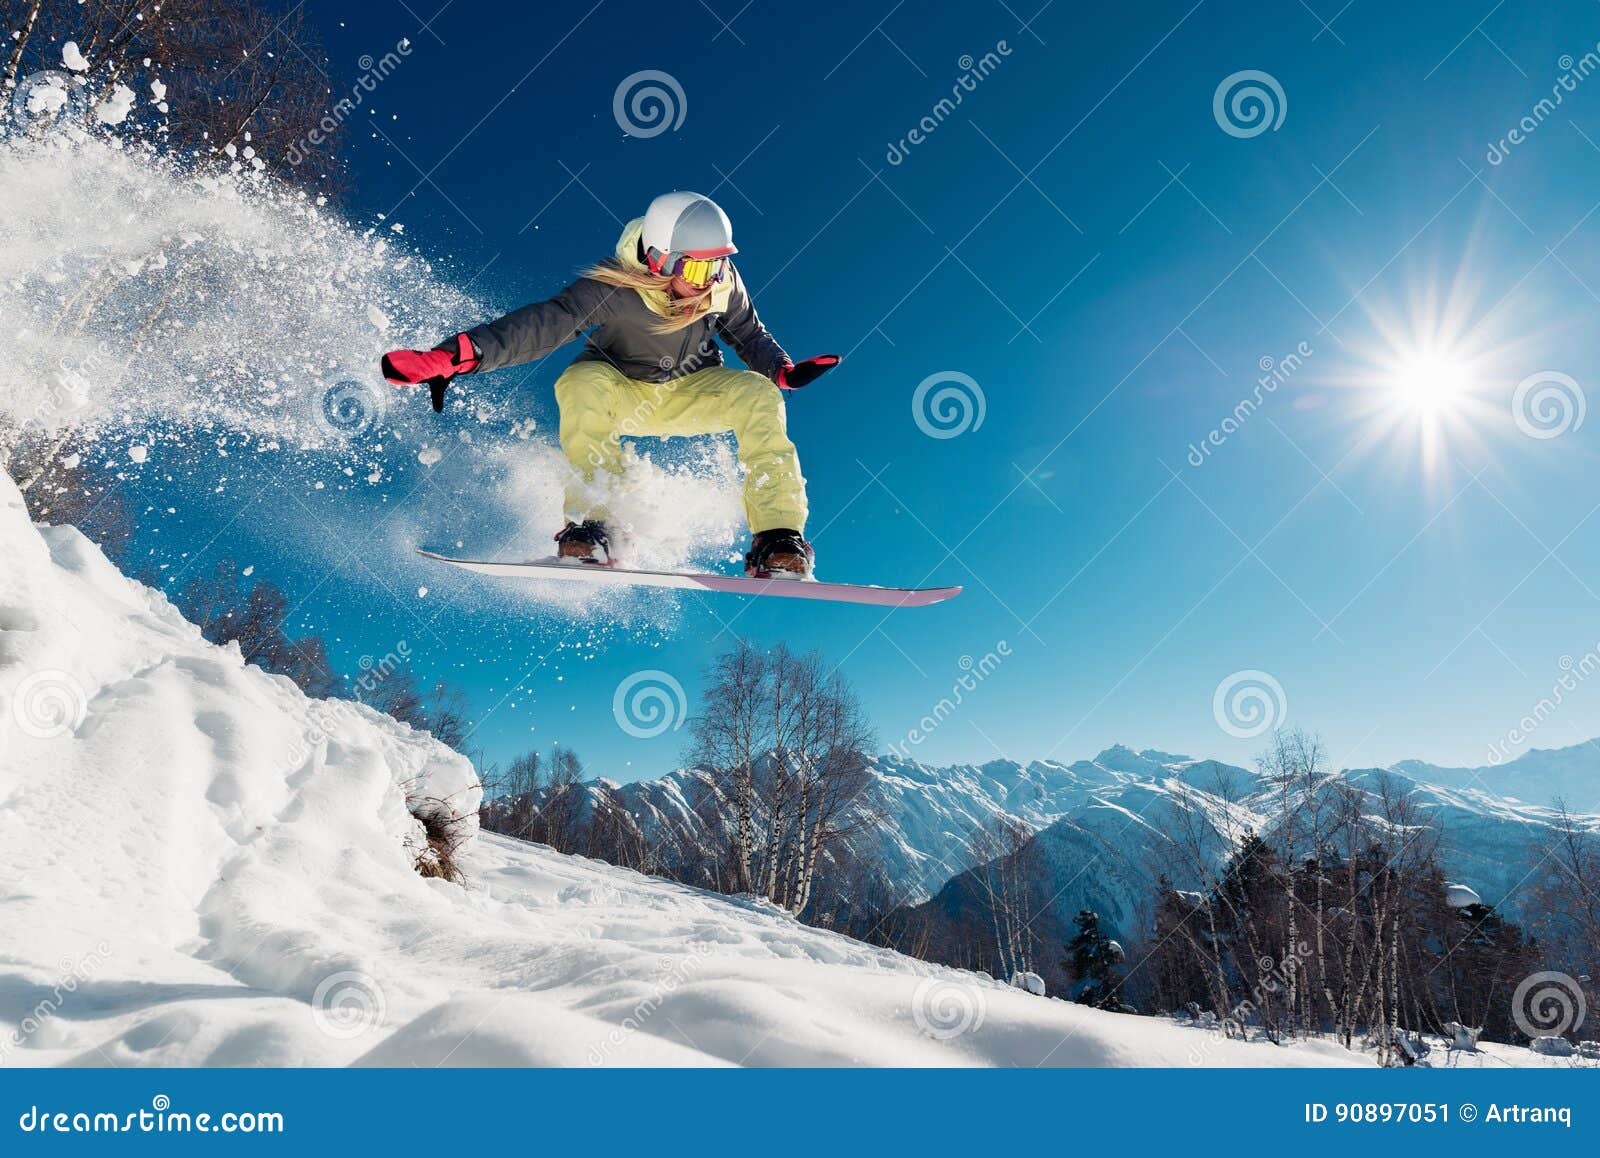 girl is jumping with snowboard